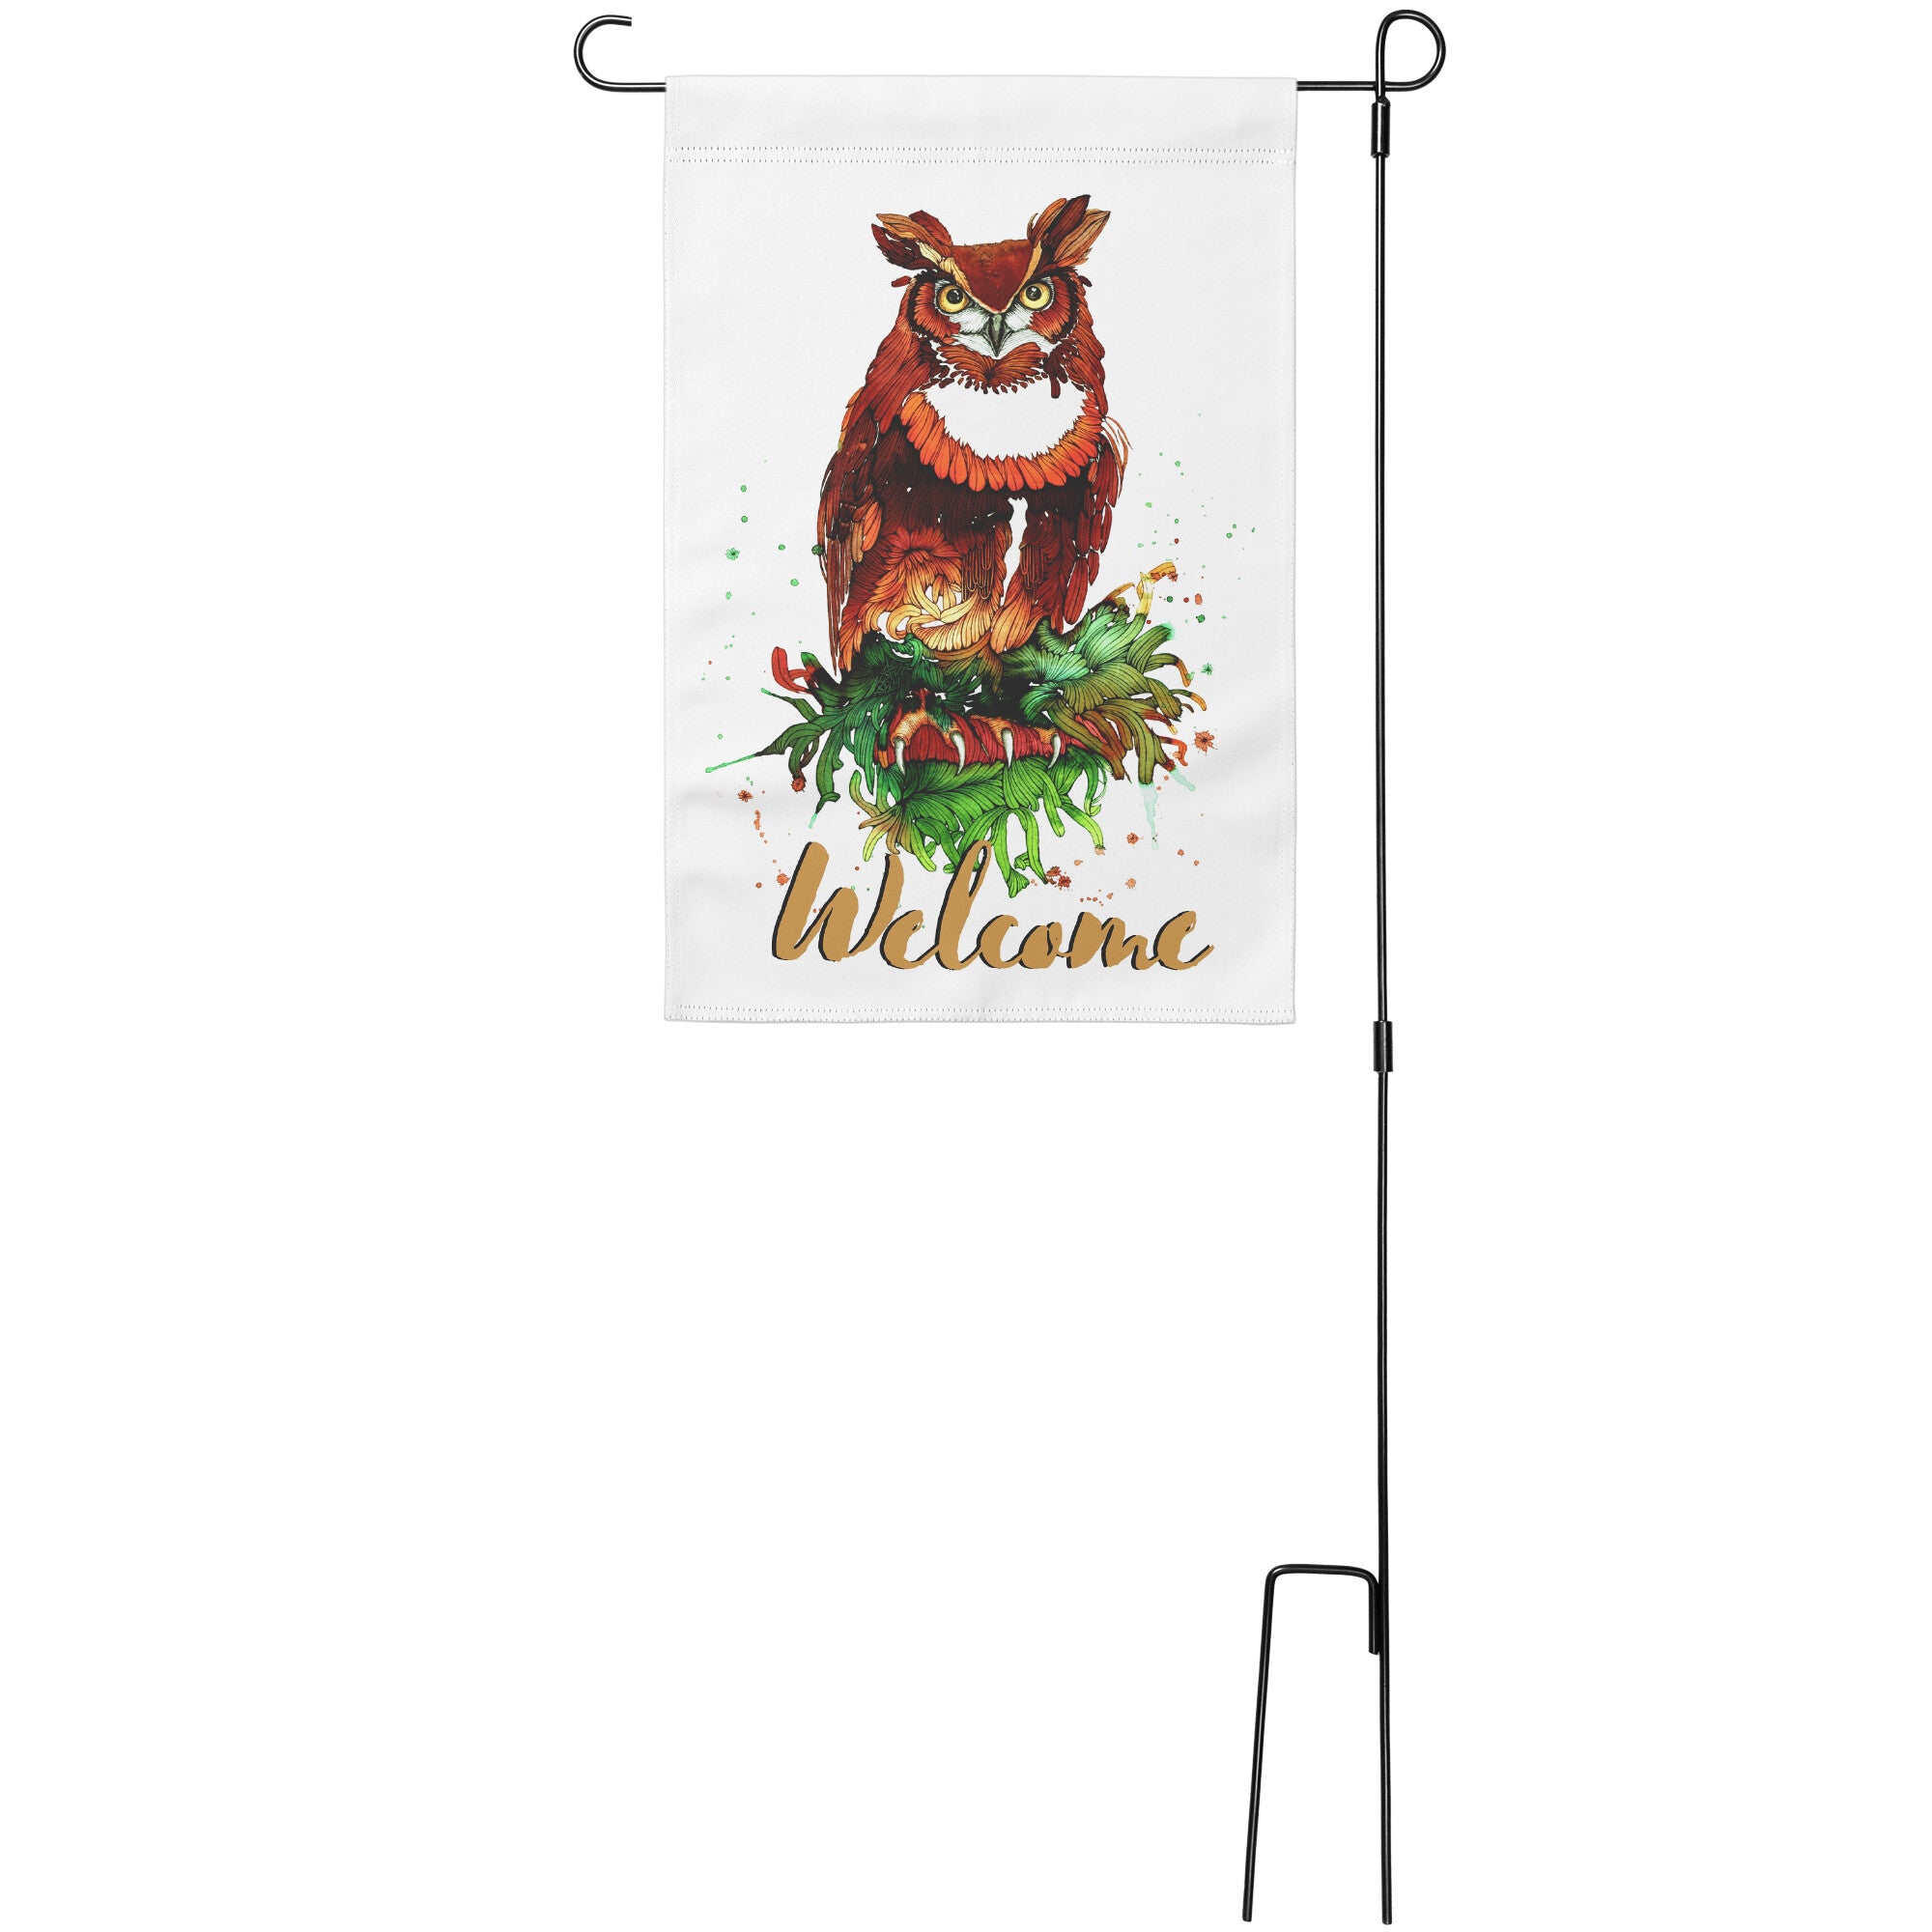 Welcome Owl Garden Banner with pole